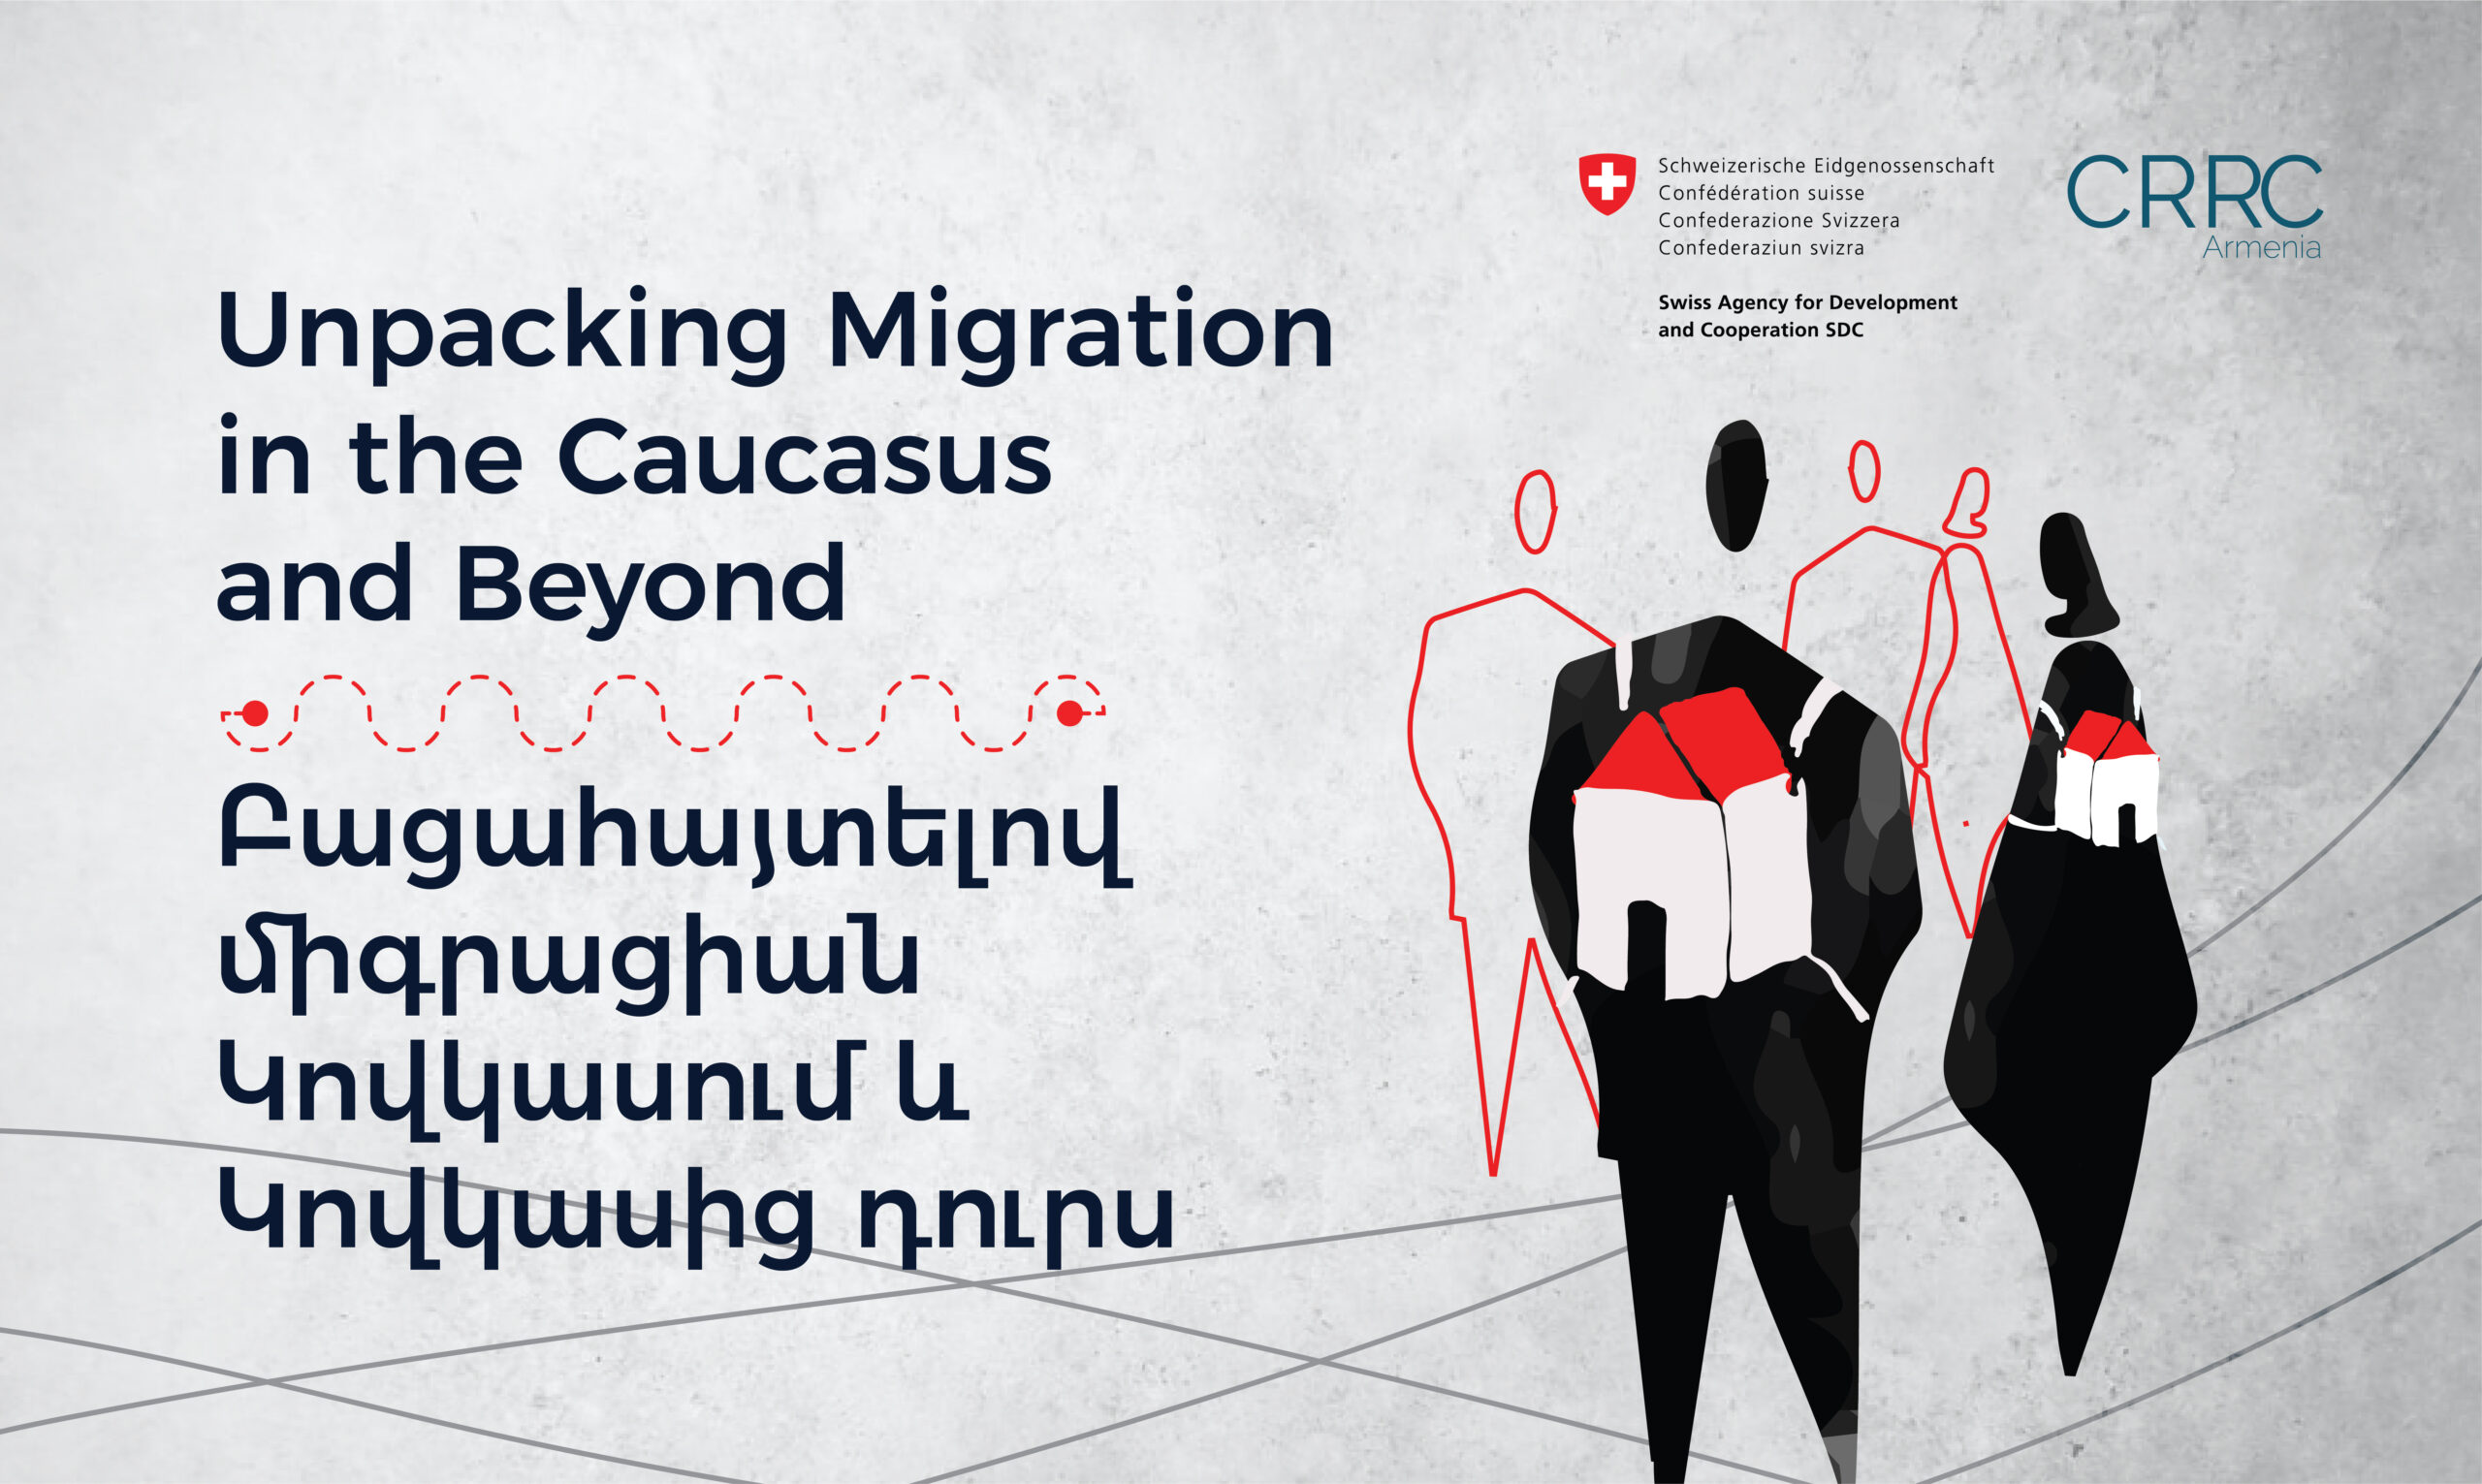 Unpacking migration in the Caucasus: Evaluating what we know for action